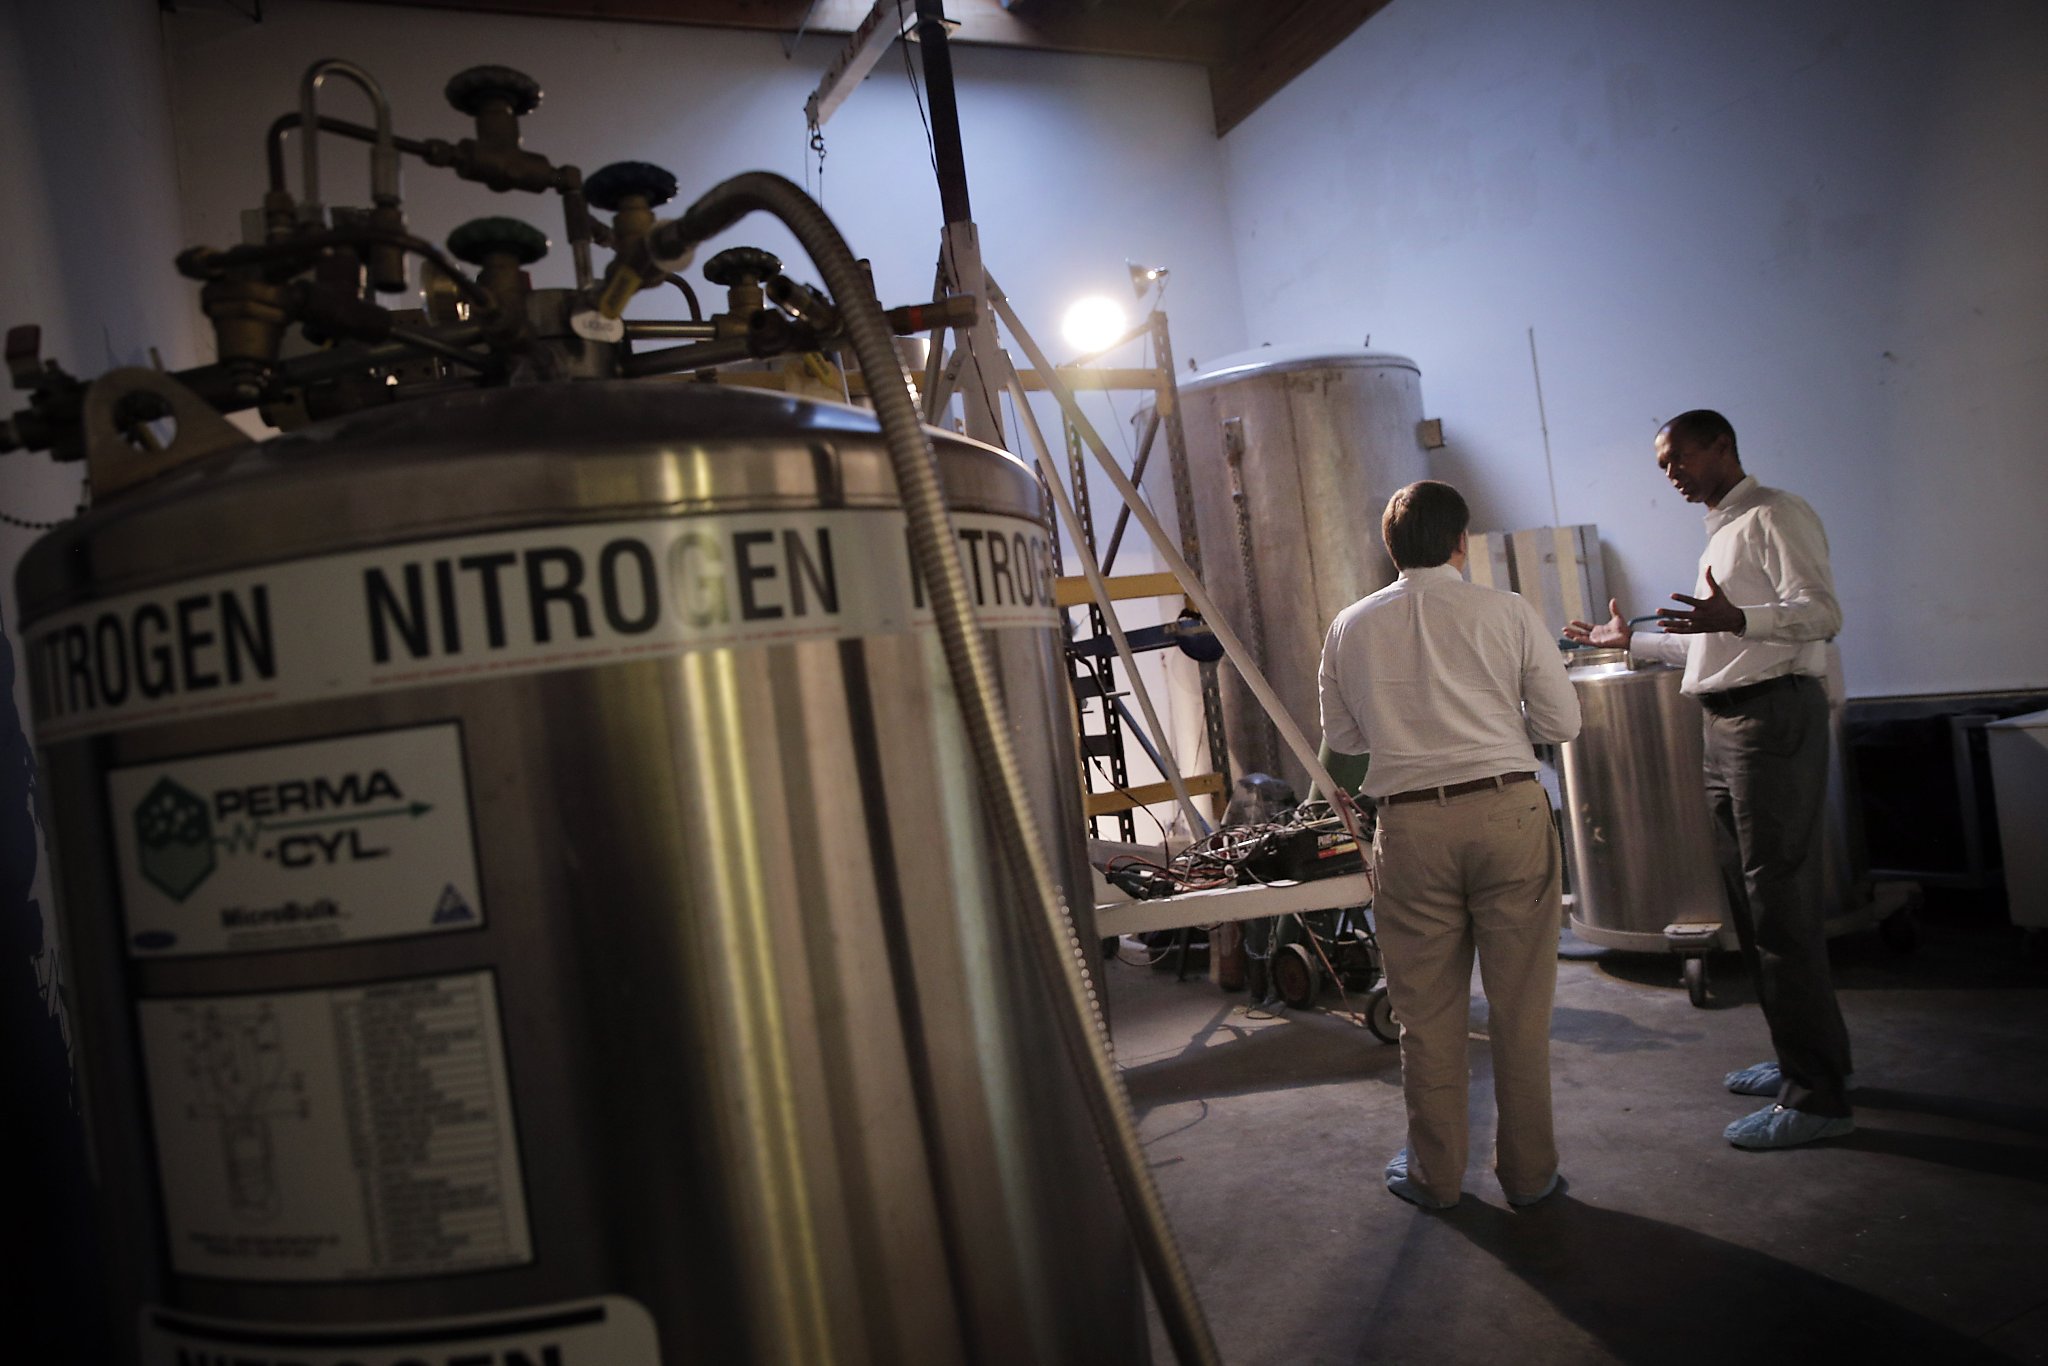 Calif. scientist's son suing cryonics nonprofit for incorrectly